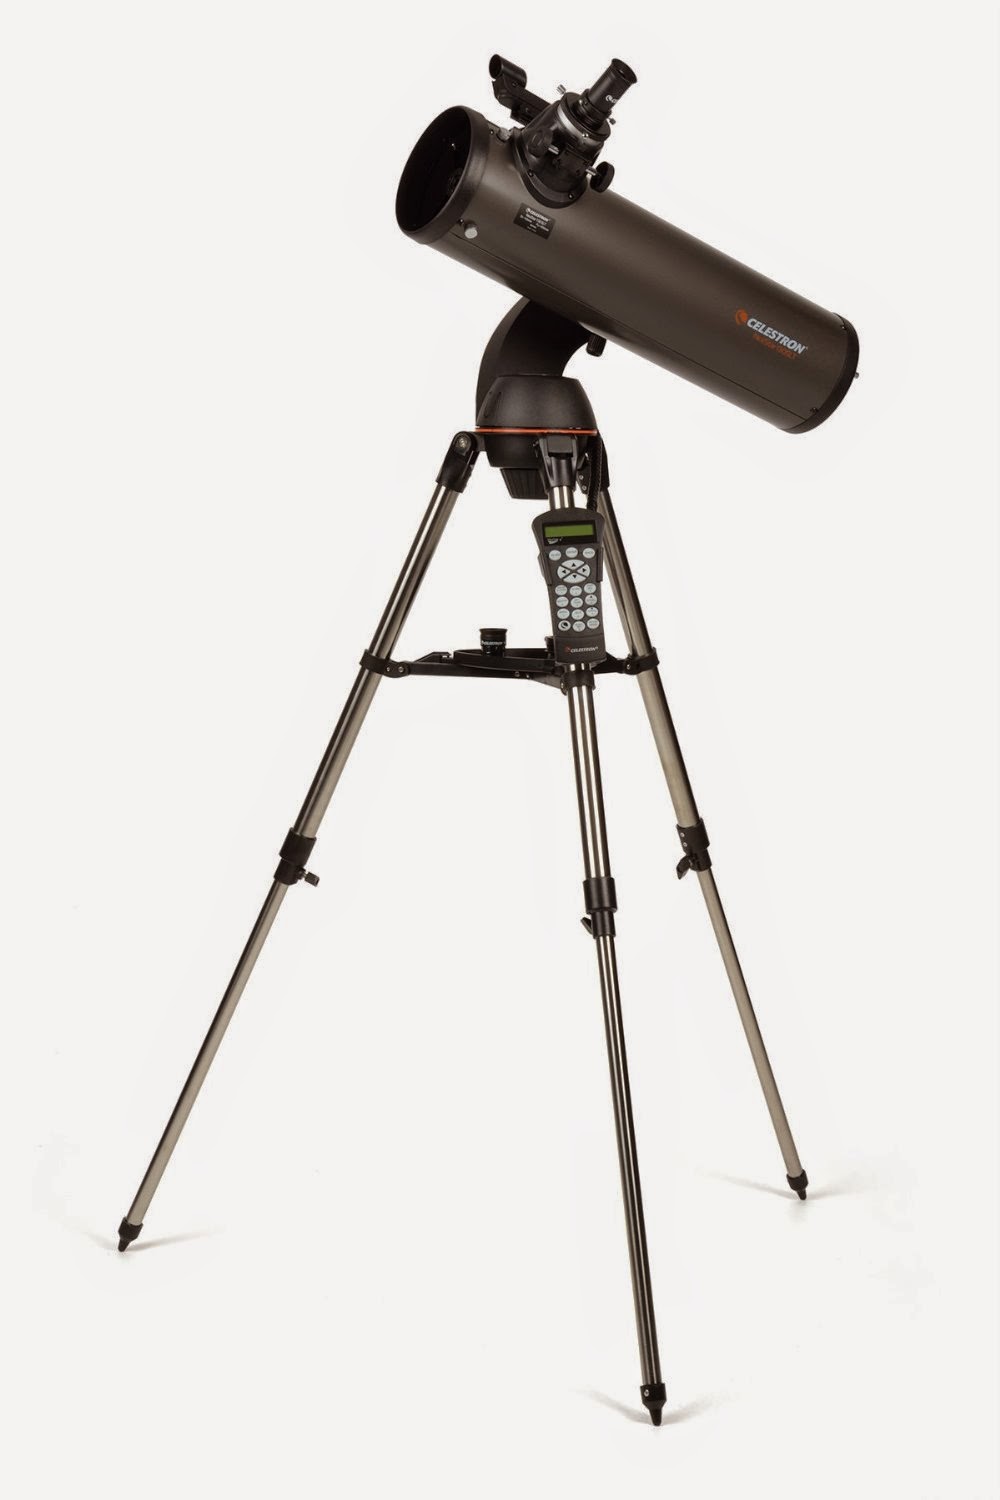 Celestron NexStar 130 SLT Computerized Telescope, picture, image, review features and specifications